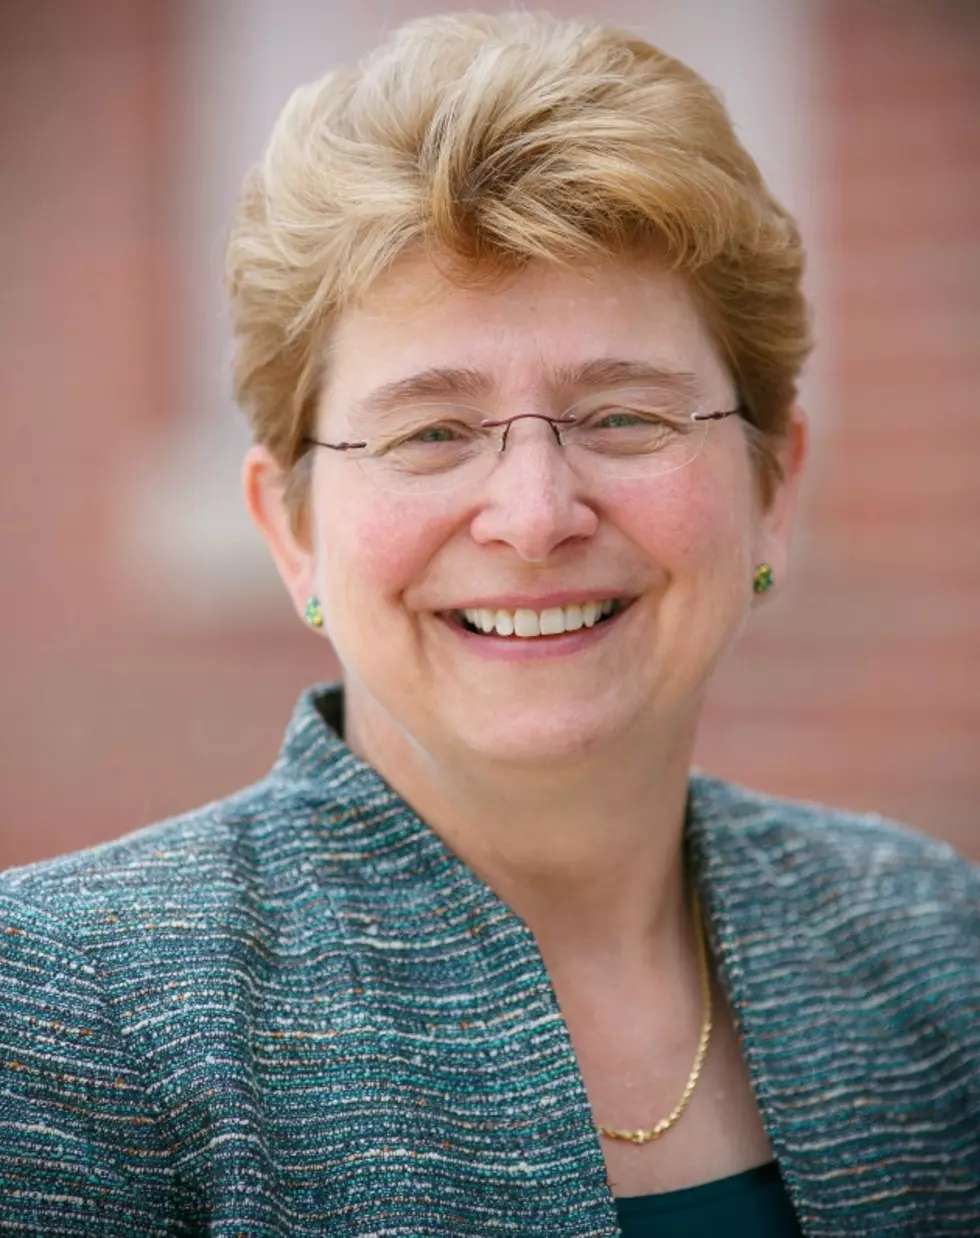 Hartwick College President Named ‘Citizen of the Year’